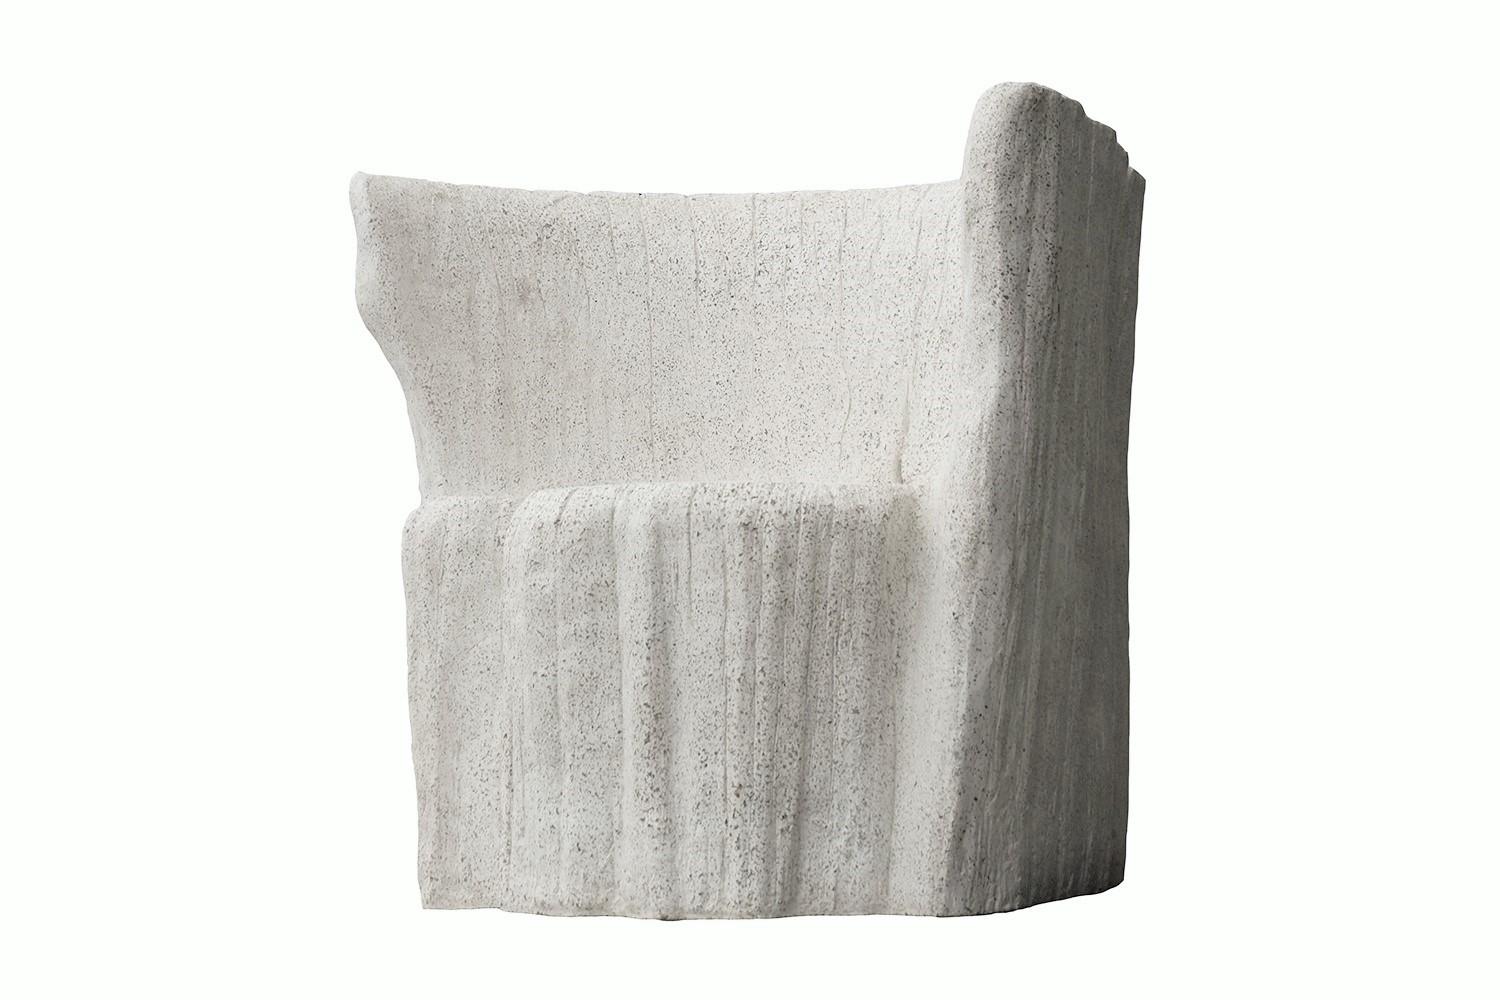 The mold for this Acacia chair was created from an actual tree stump. Pictured in our Natural stone finish, the texture and modern look of concrete make it appropriate for a wide variety of styles and spaces.

Dimensions: Width 37 in. (94 cm), depth